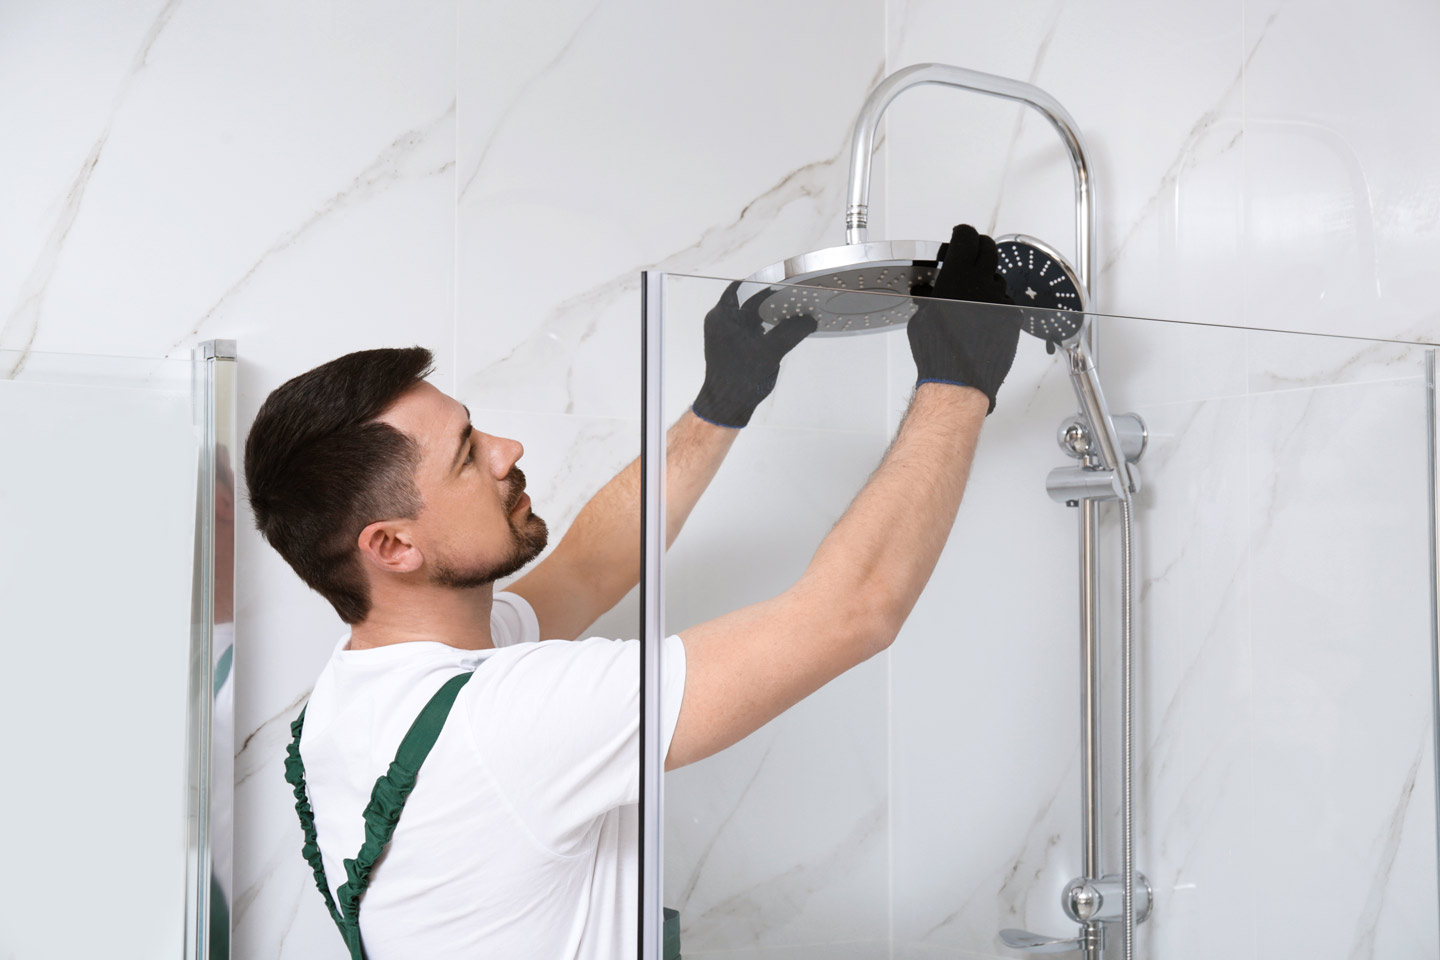 Plumbing and Heating Systems Are Vital Apparatuses of Your Home or Office